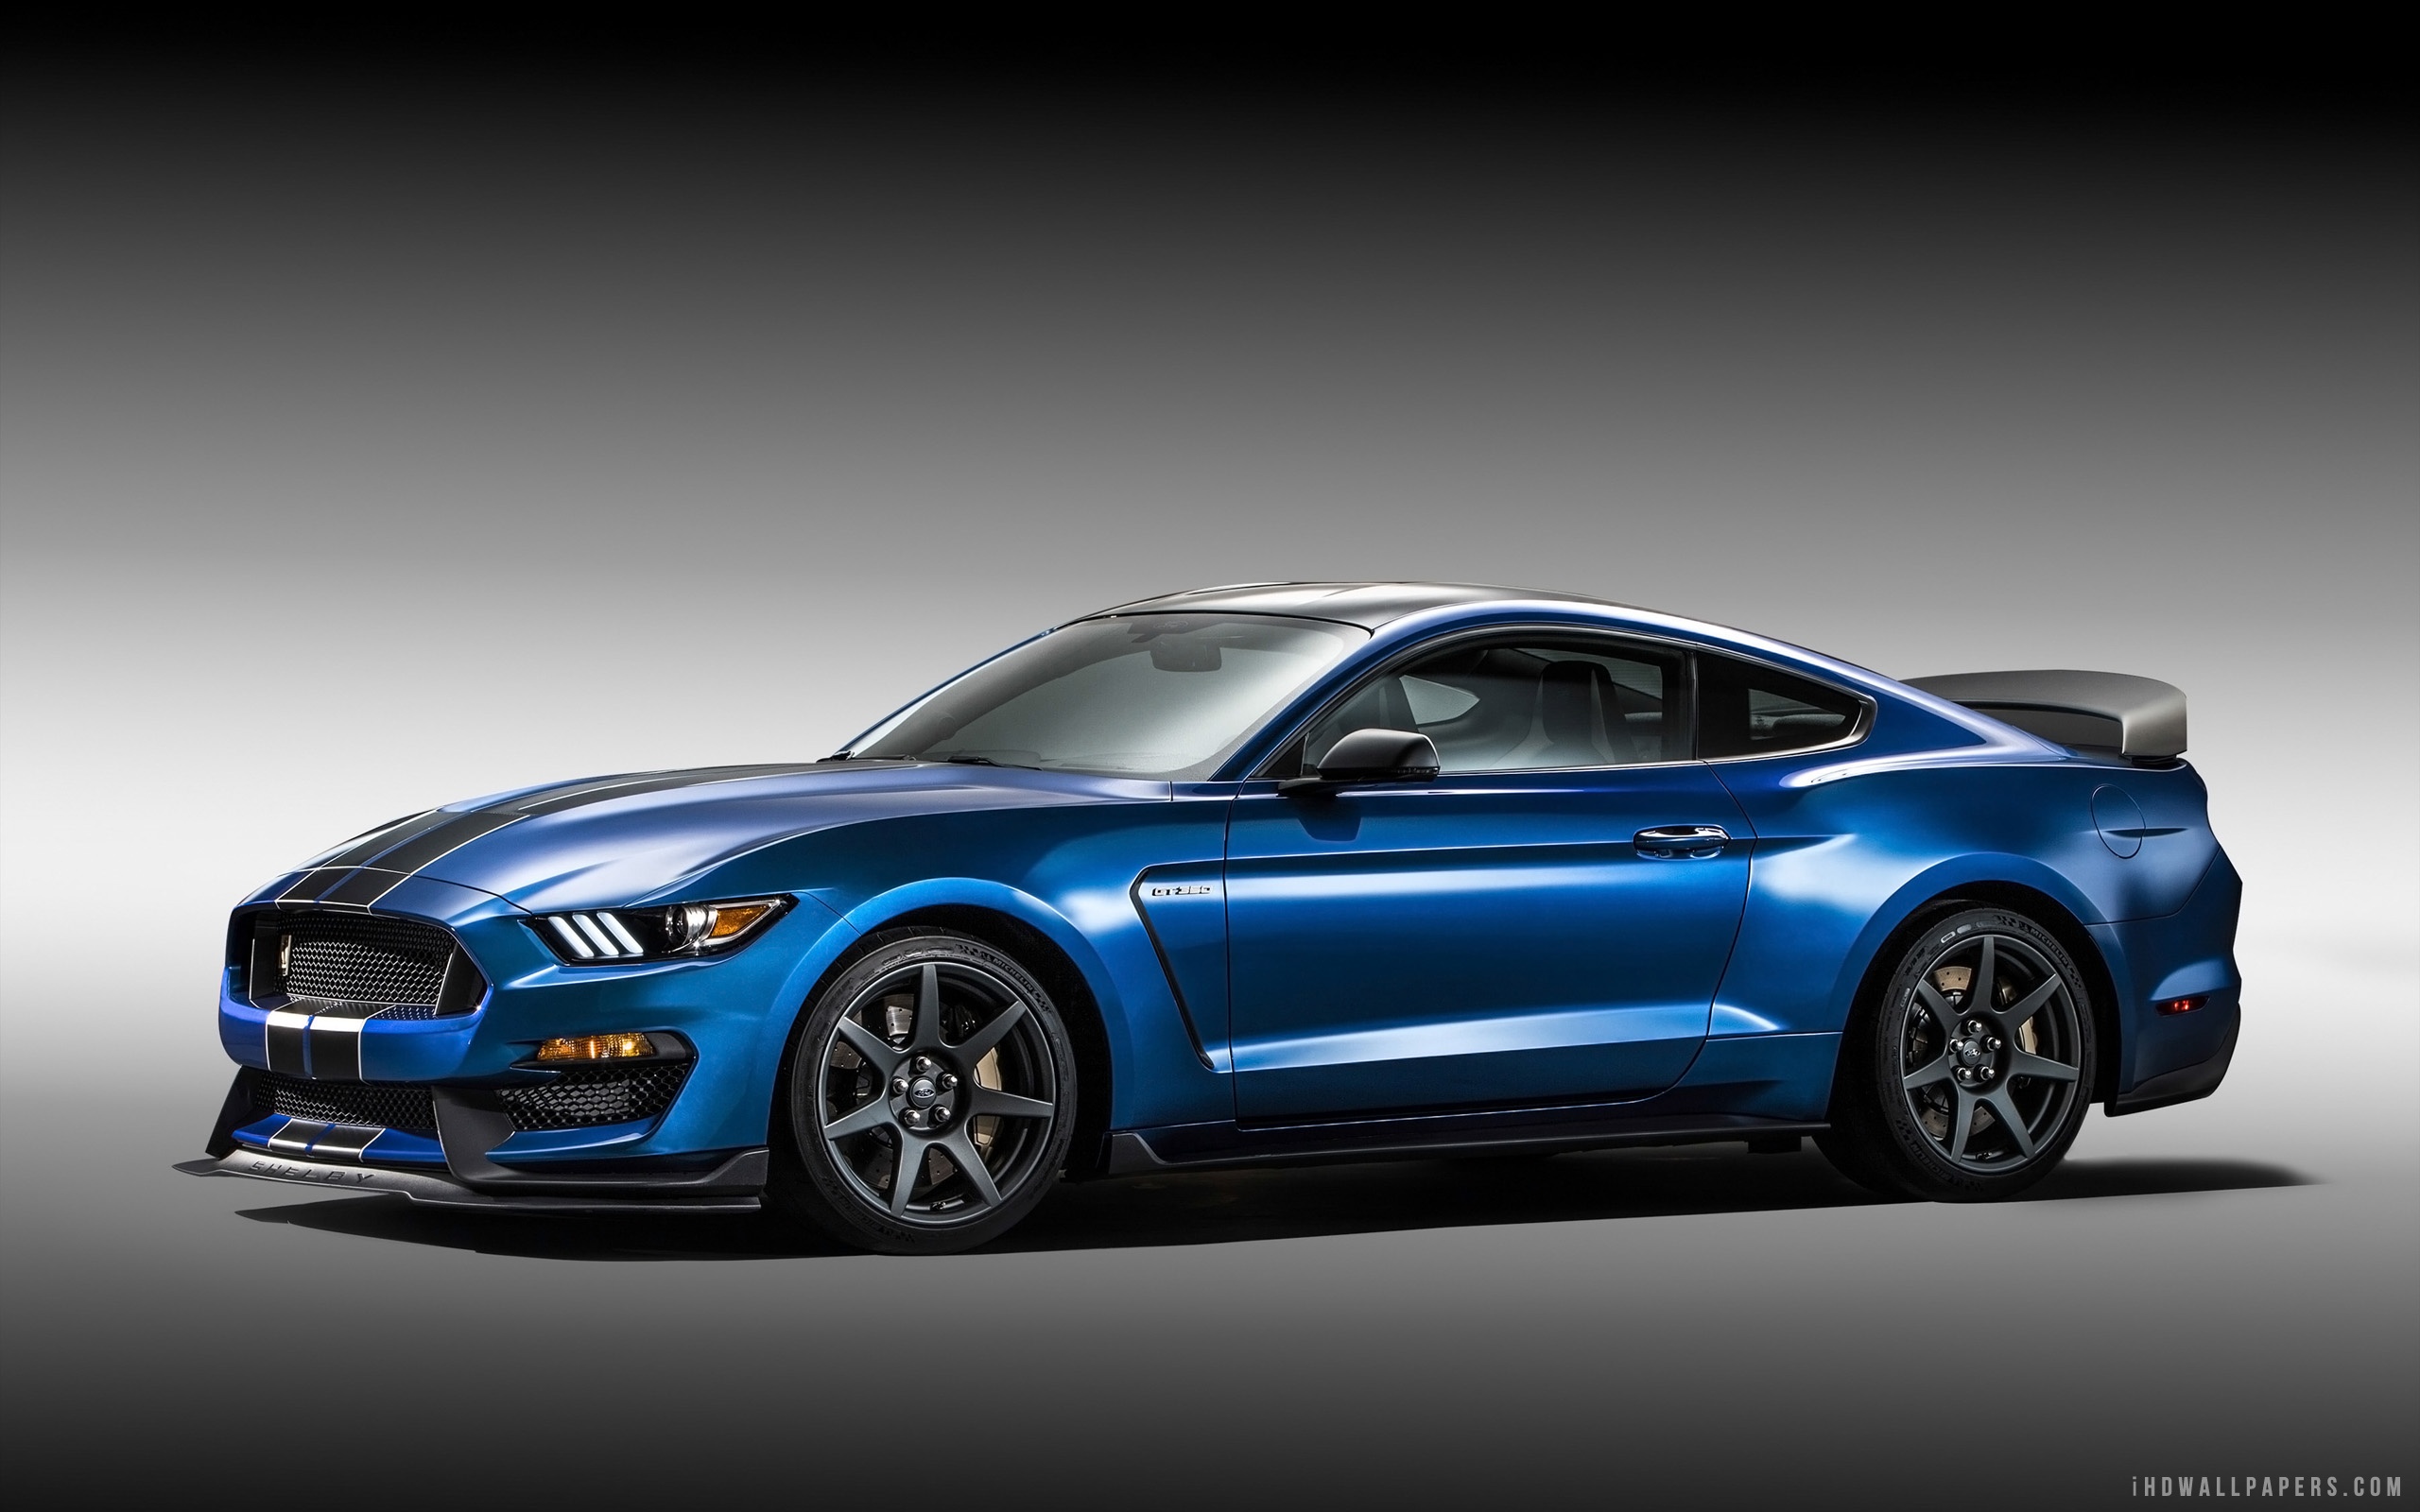 Ford Mustang Shelby Gt350 HD Wallpaper IHD